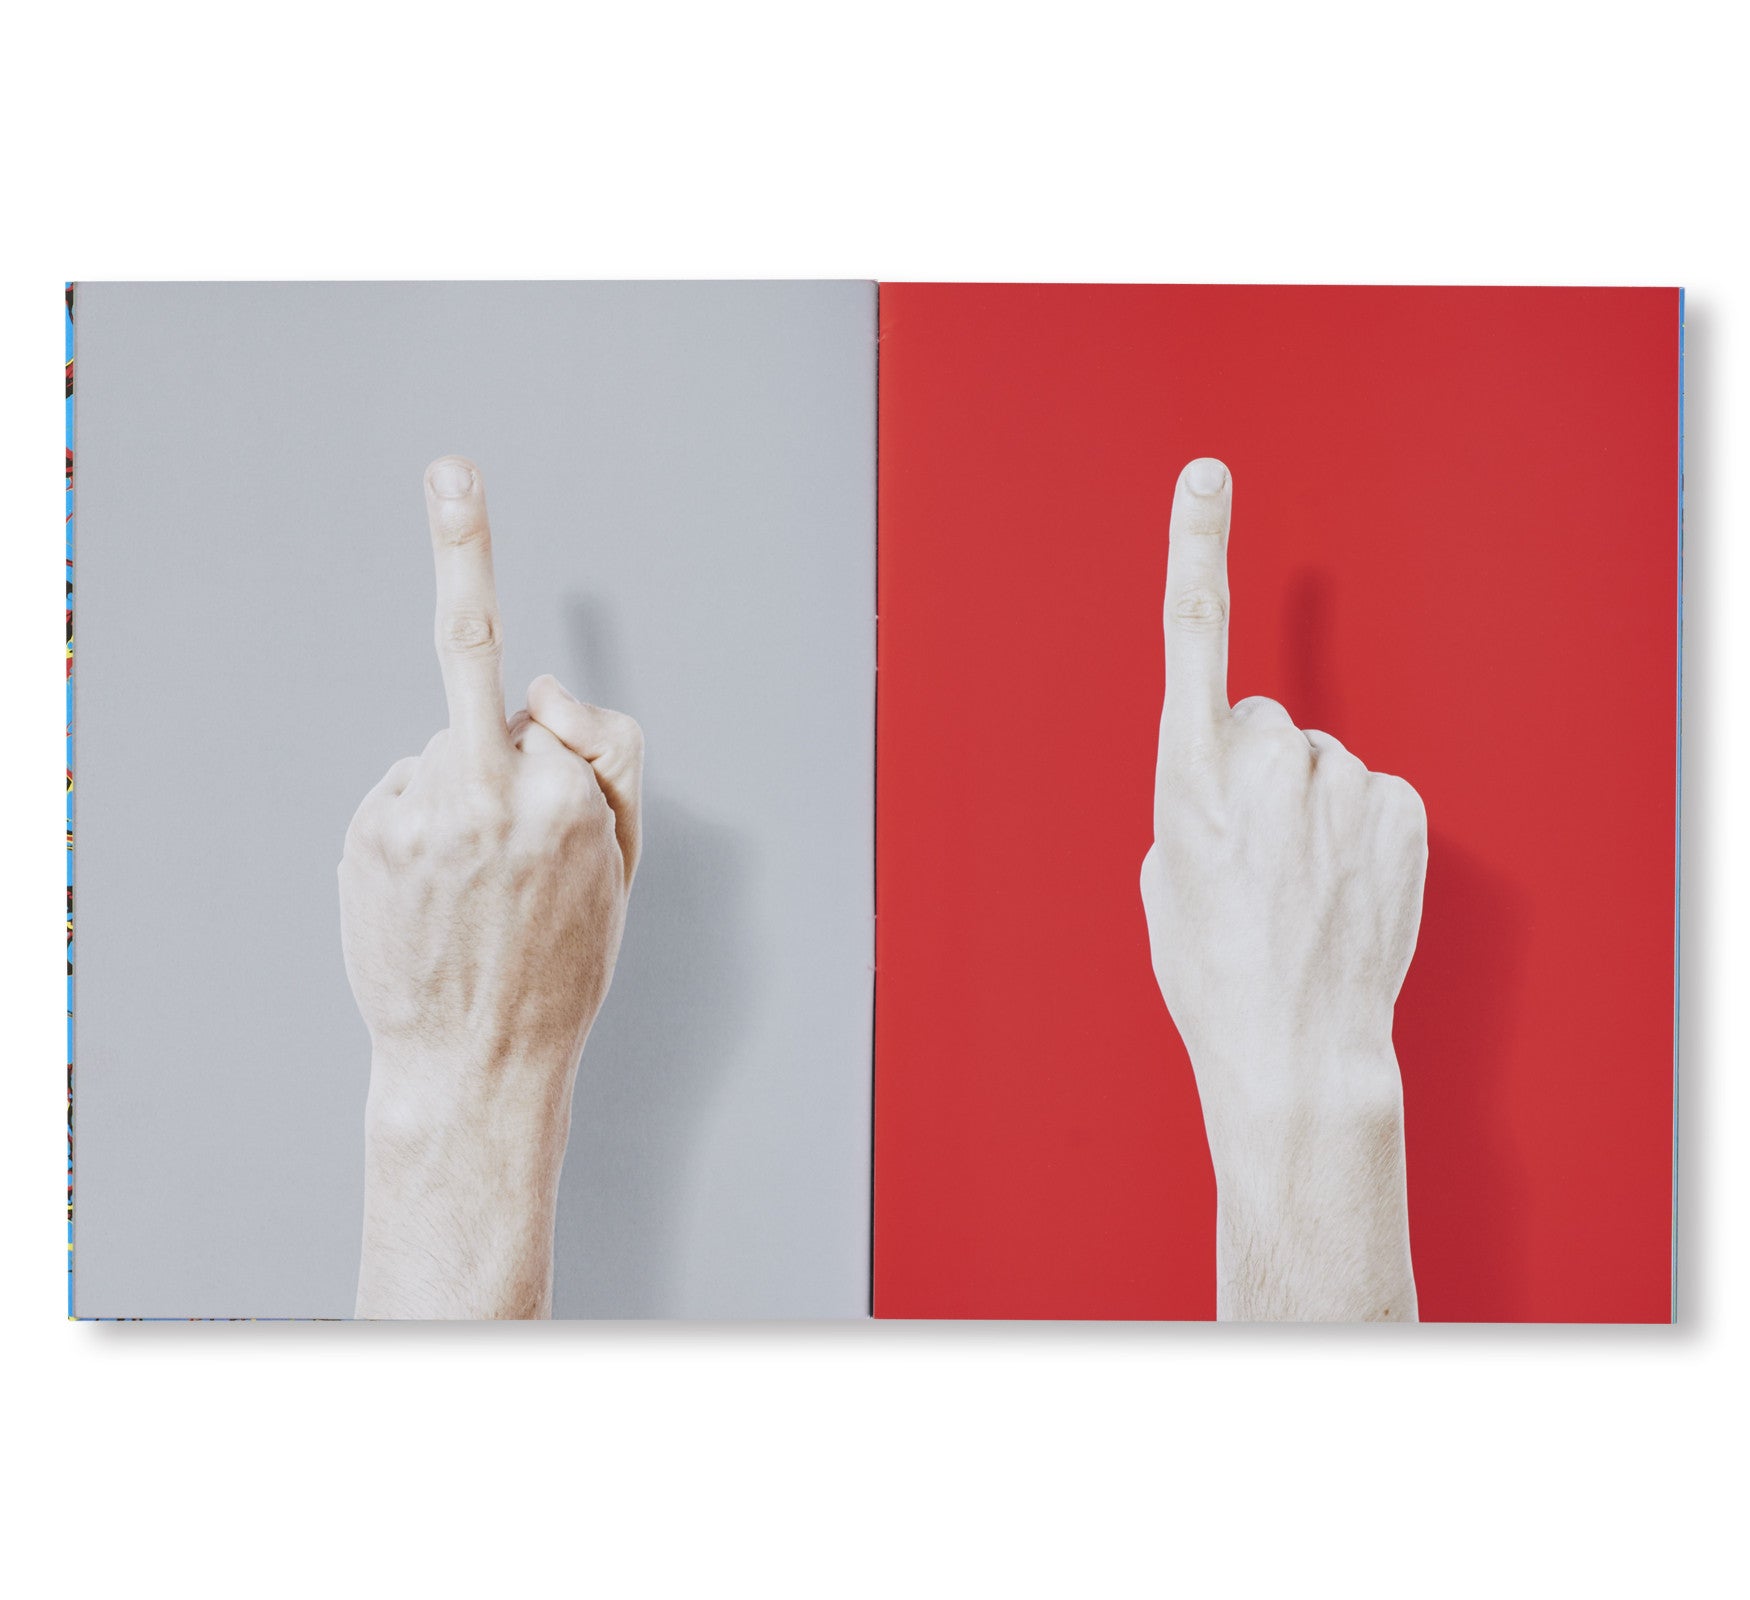 FEELING WITH FINGERS THAT SEE by Stuart Whipps